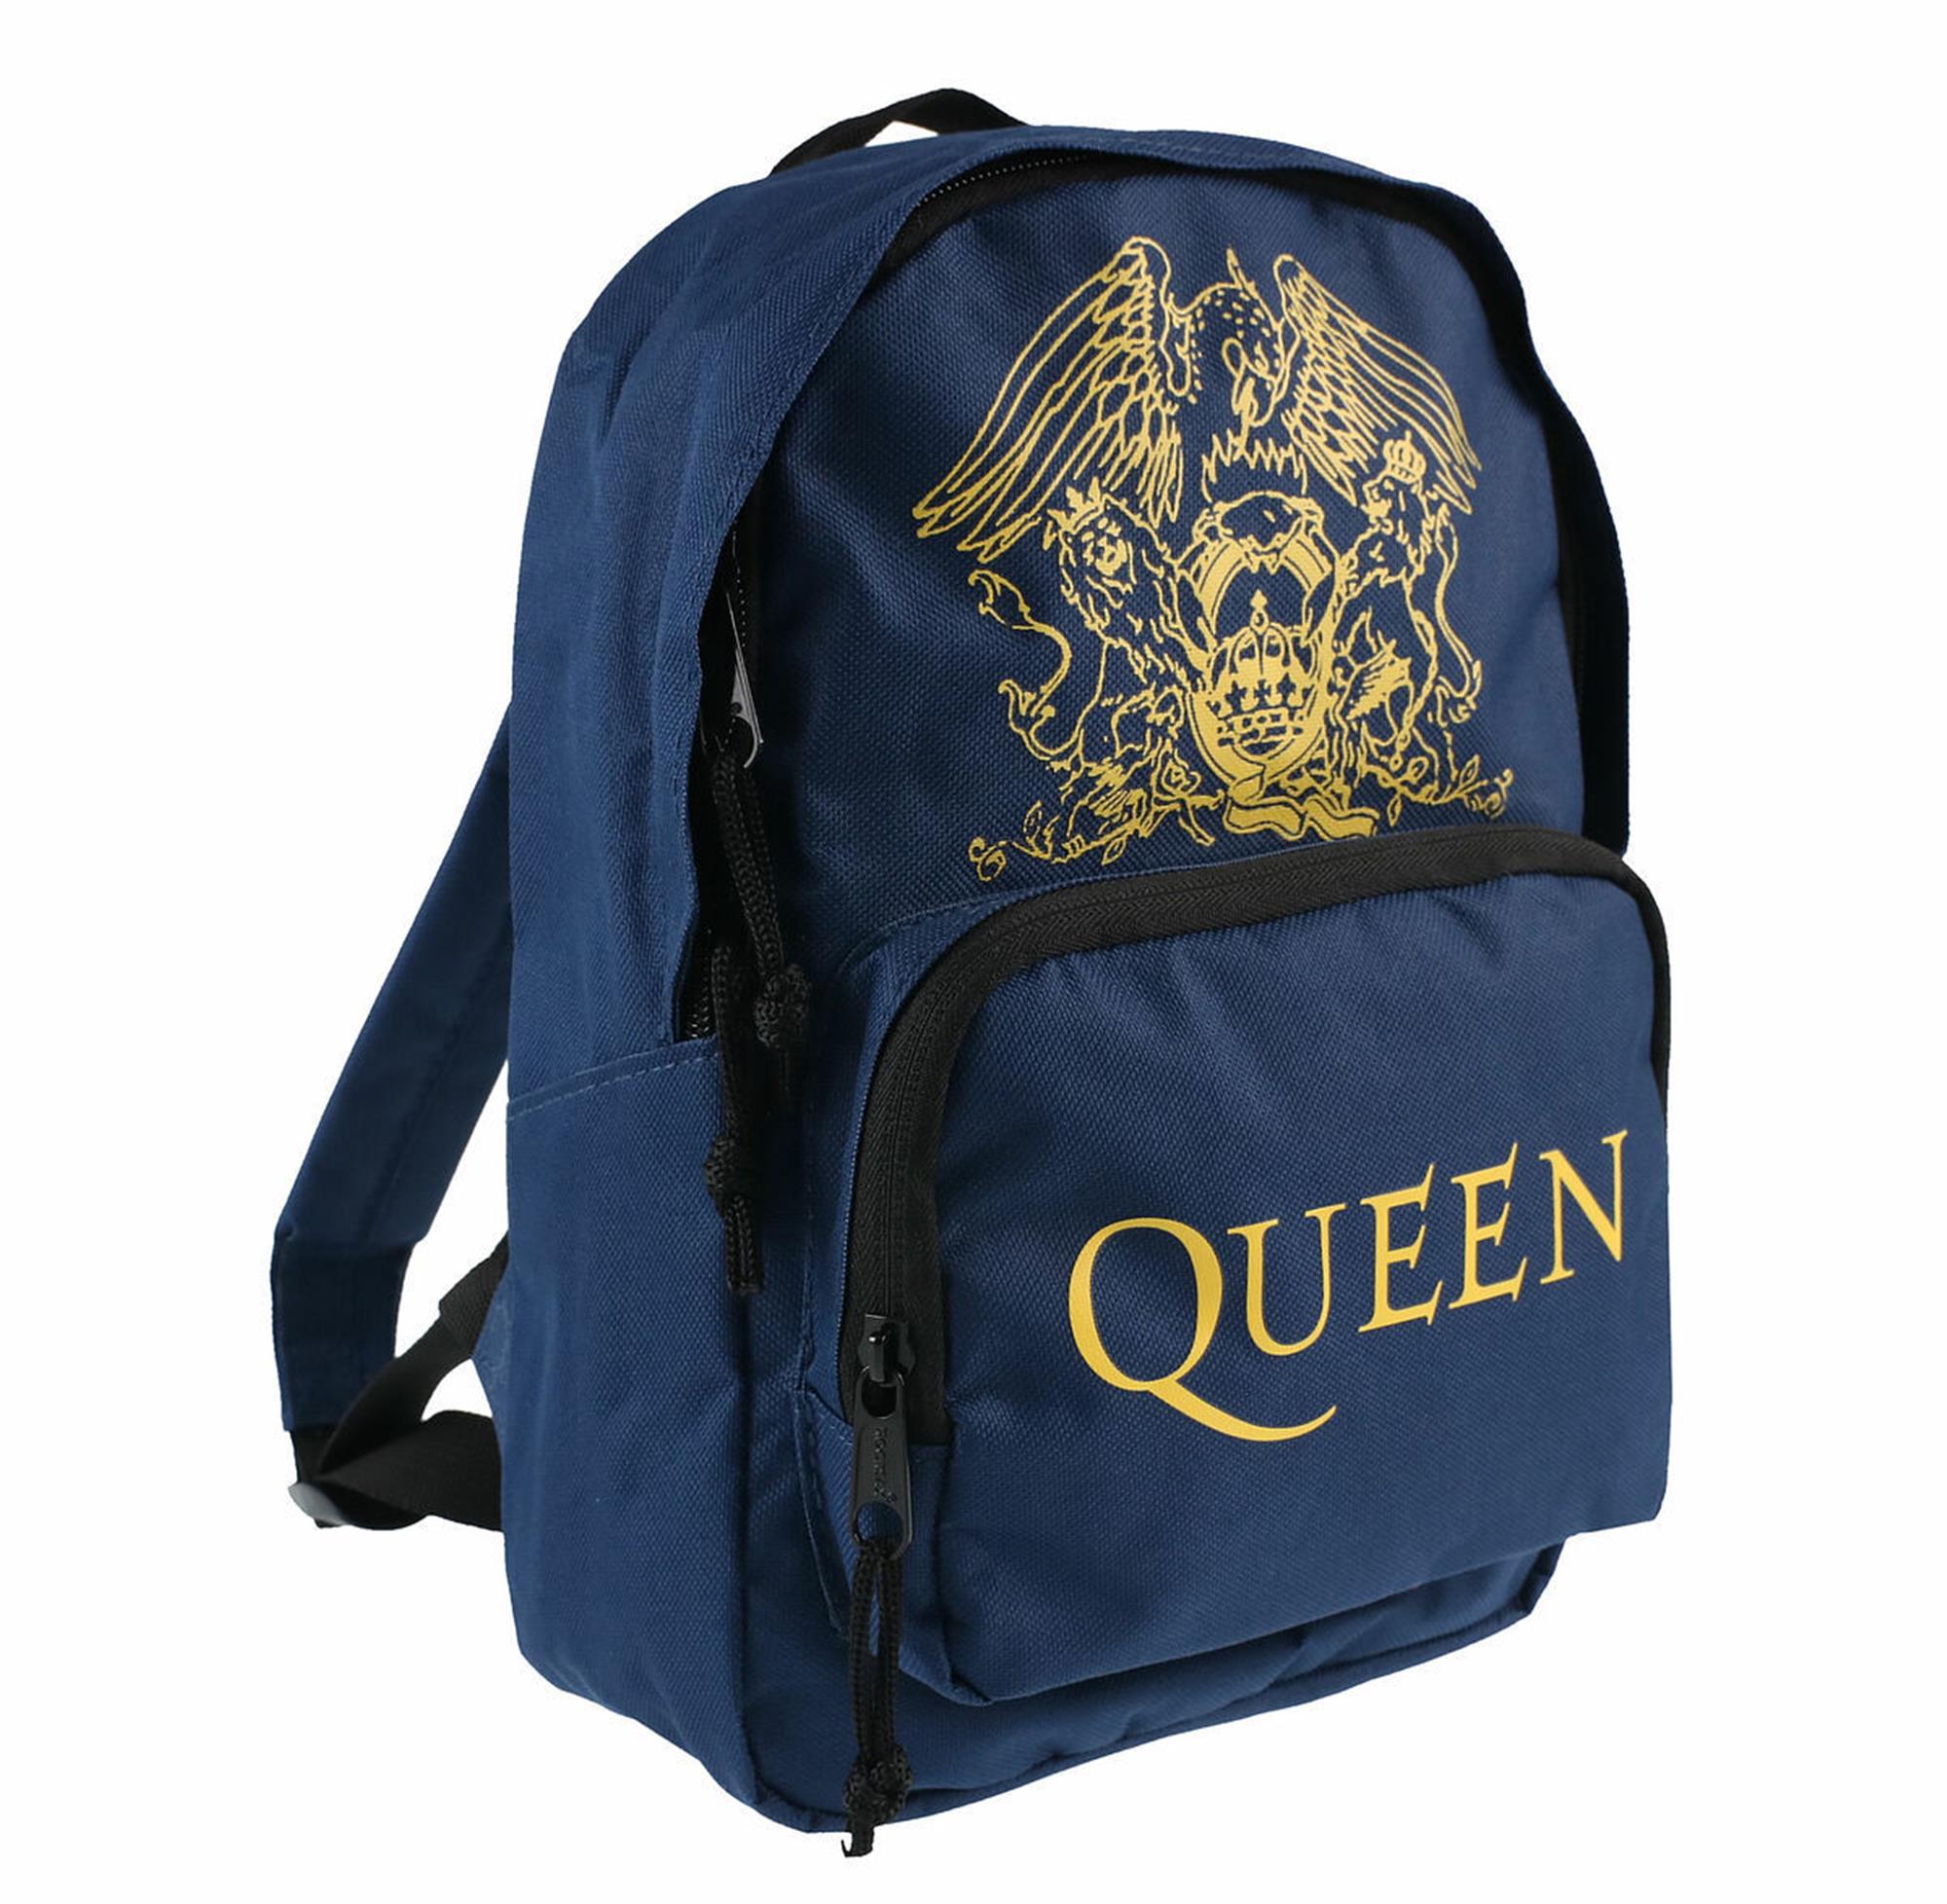 Royal Crest Small Backpack